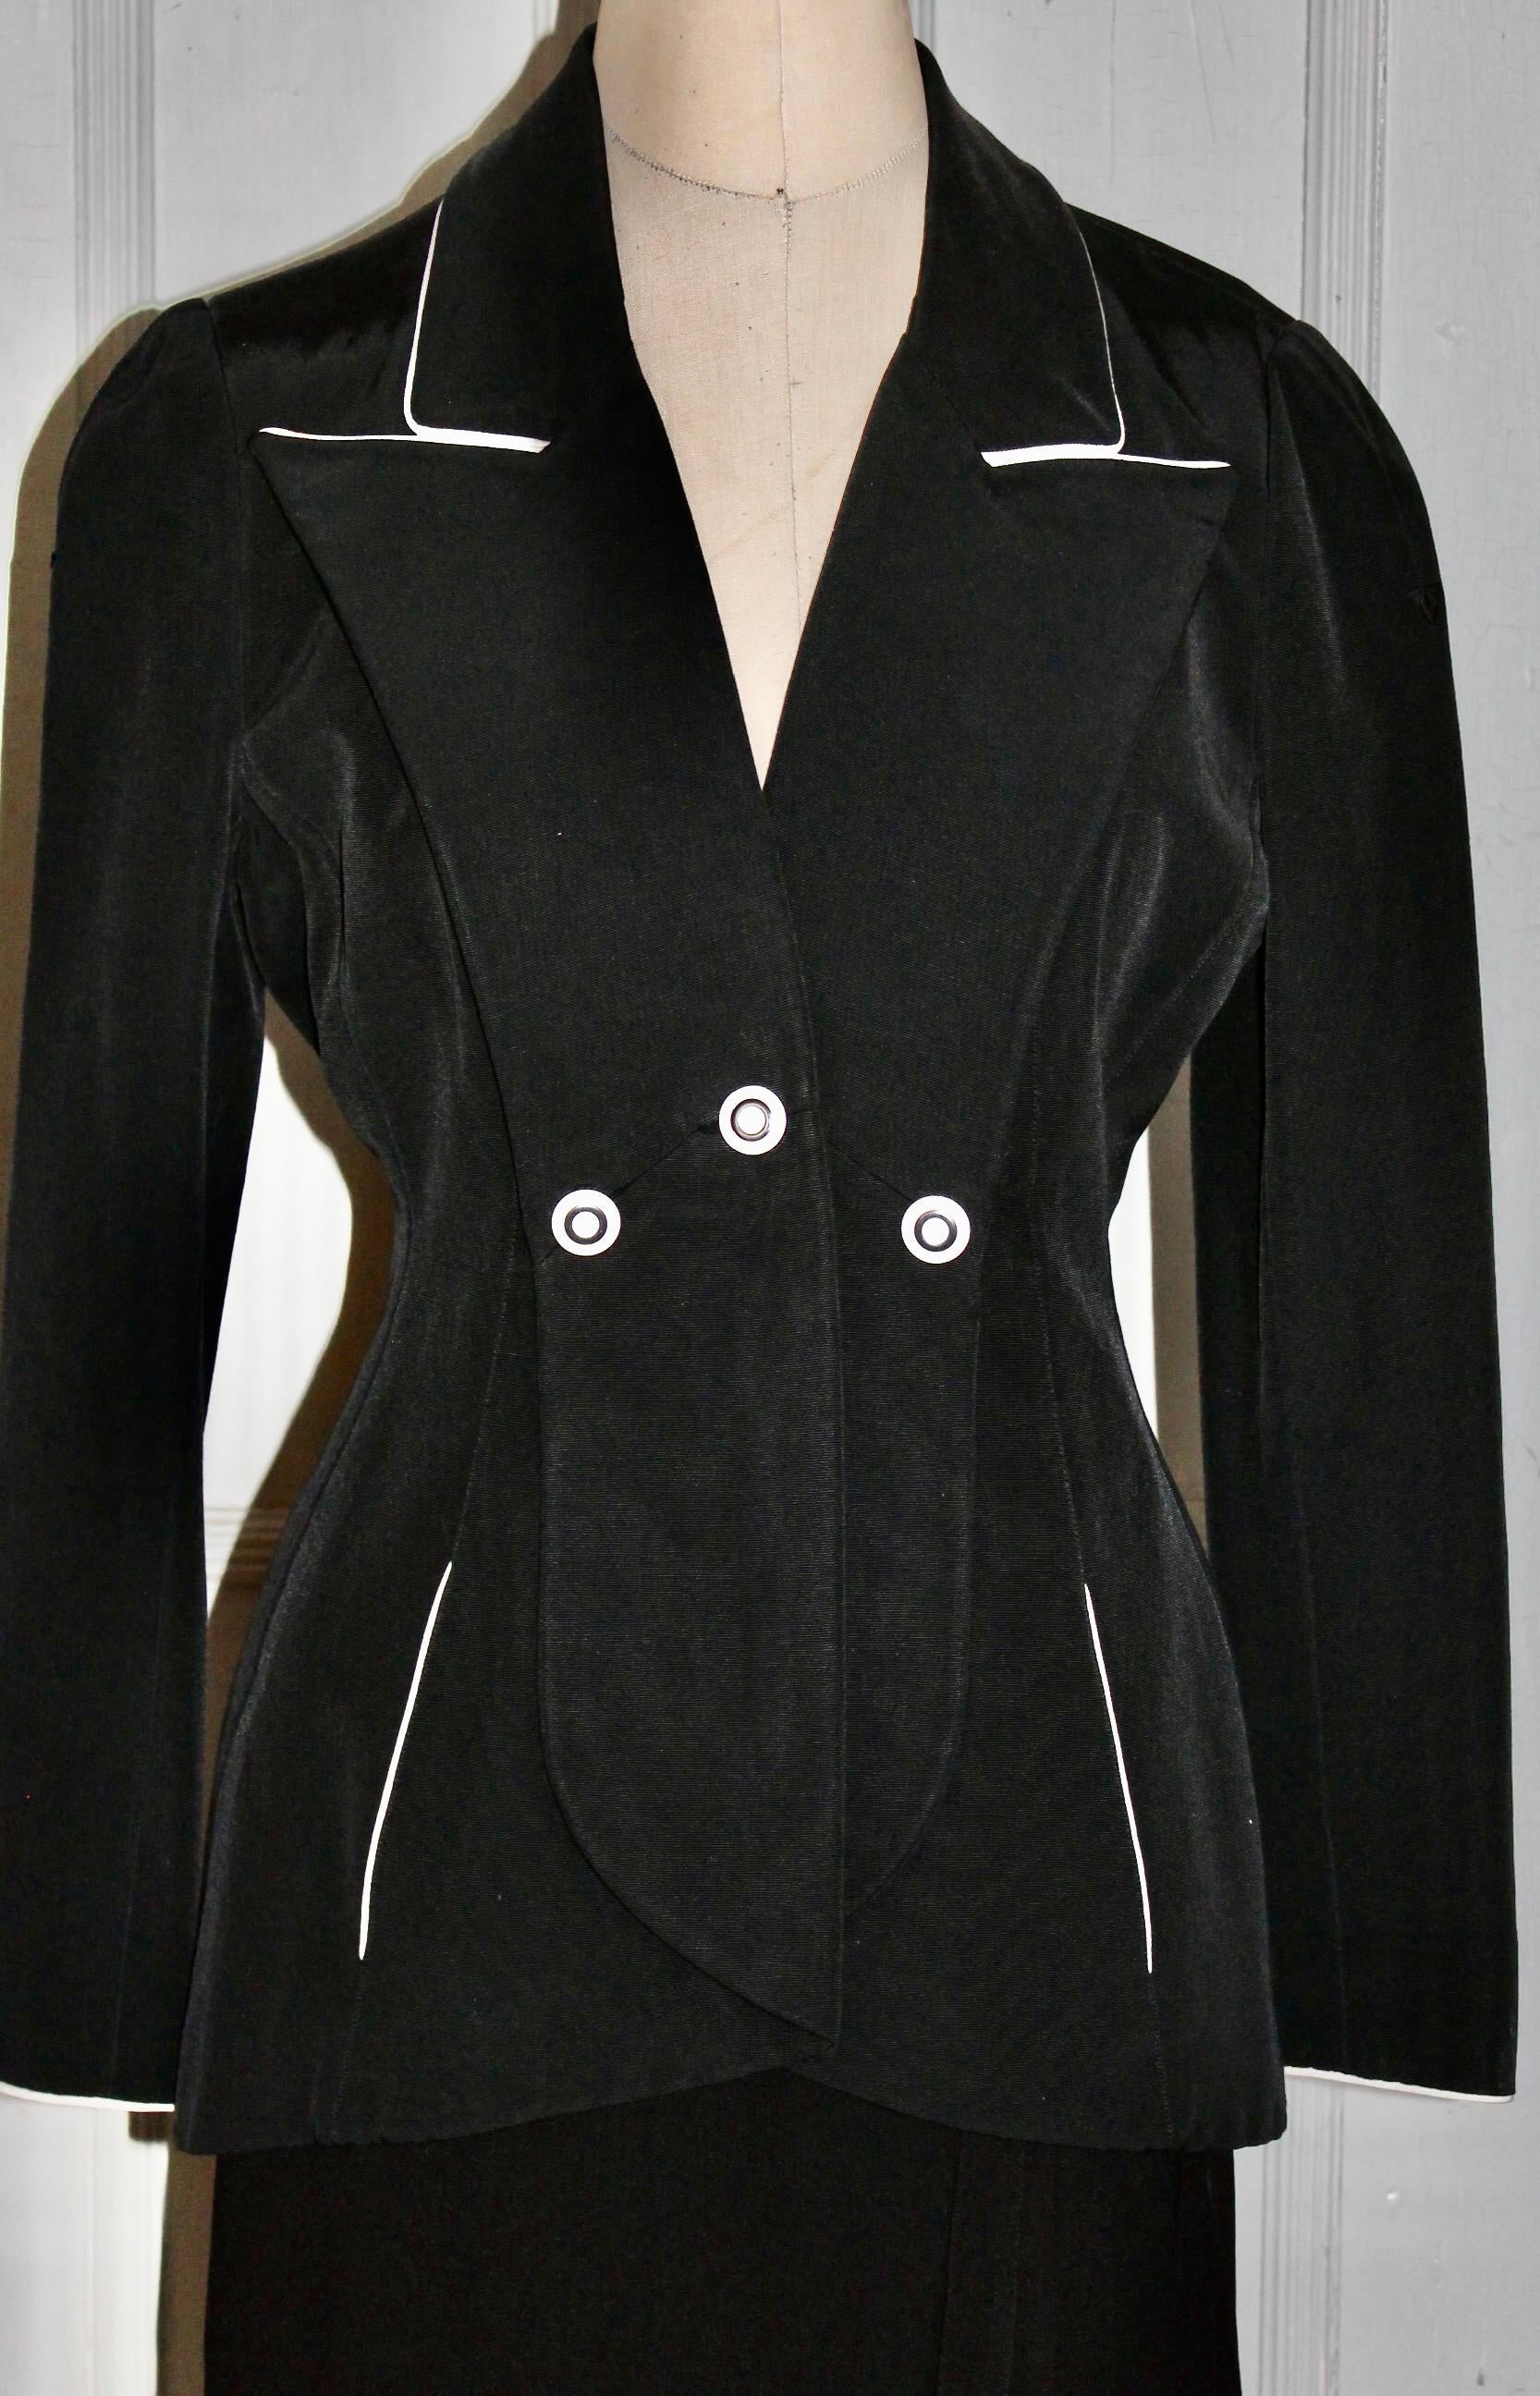 A Karl Lagerfeld Made in France, Classic black with white buttons and white trim jacket.  Pockets.  Appears to be a silk blend.